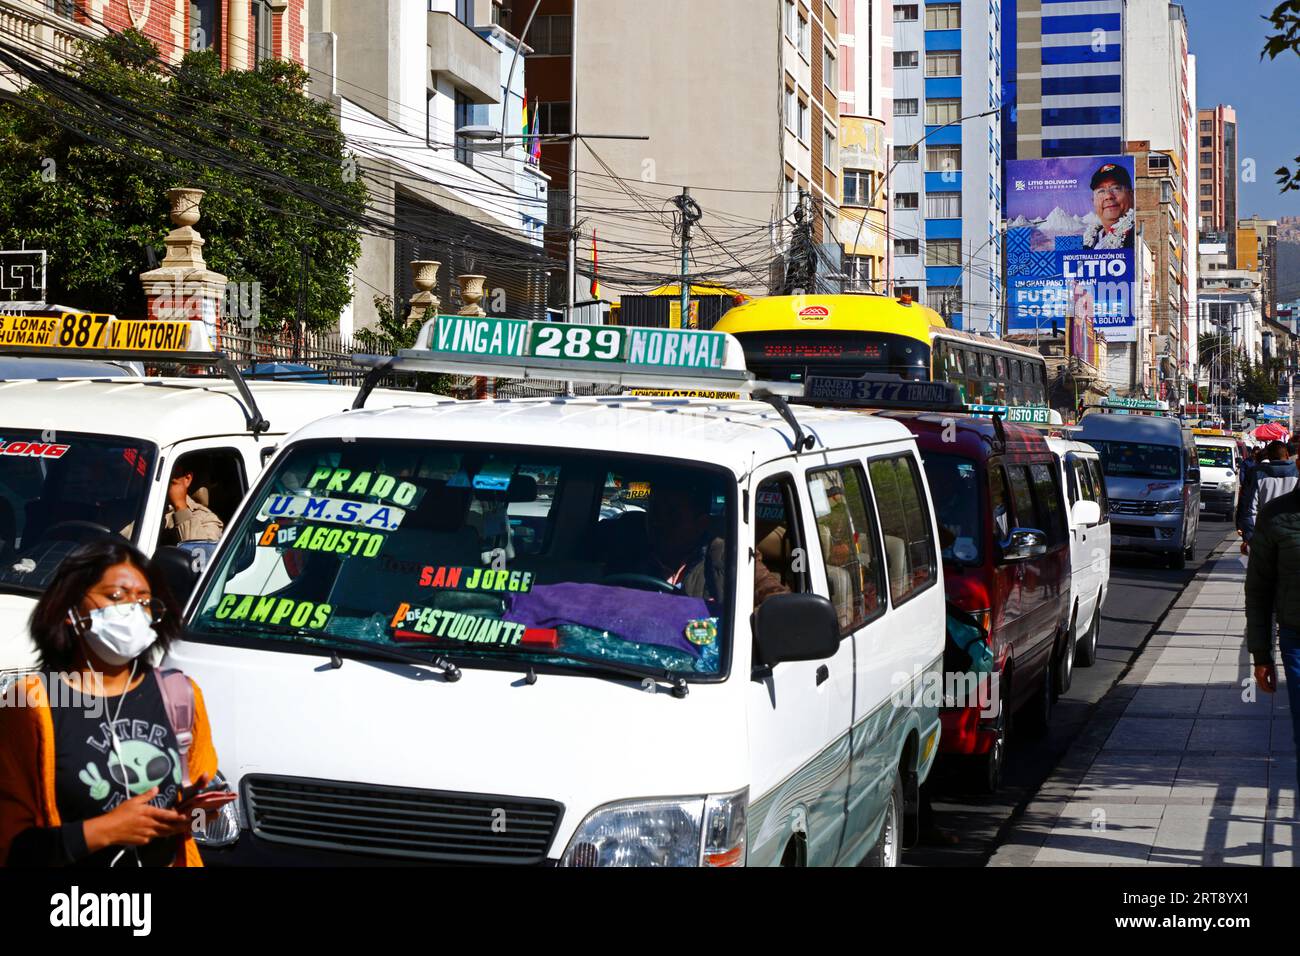 La Paz, BOLIVIA; September 11th 2023: Traffic jams on Av 6 de Agosto in central La Paz, with Bolivian president Luis Arce Catacora on a hoarding promoting the 'Industrialisation of lithium, a big step towards a sustainable future for Bolivia' in the background. Bolivia has some of the world's largest lithium reserves in the Salar de Uyuni salt flat, the development of which is central to the govenrnment's economic policy. This year Bolivia has signed agreements with the Chinese battery maker CATL and the Citic Guoan Group, and Russian state firm Rosatom to develop these resources. Stock Photo